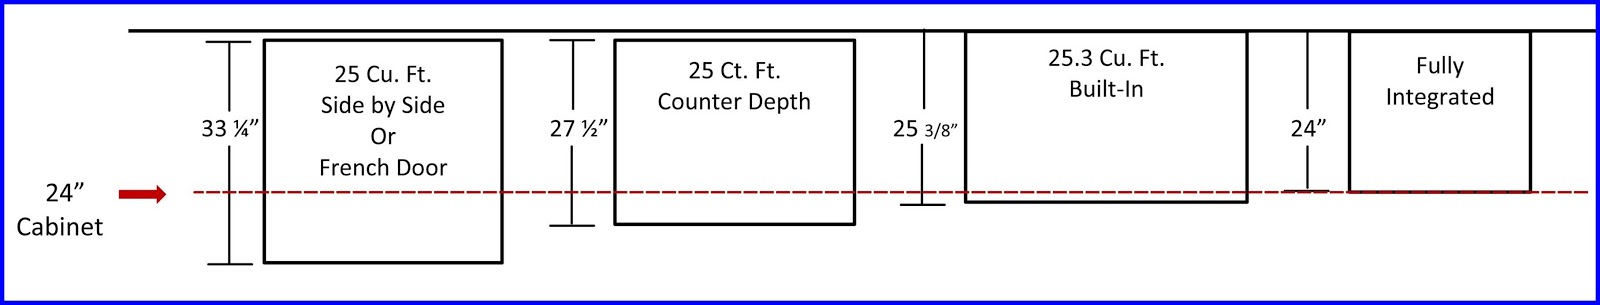 12 Average Kitchen Counter Depth What is a Standard Fridge Size? Average,Kitchen,Counter,Depth